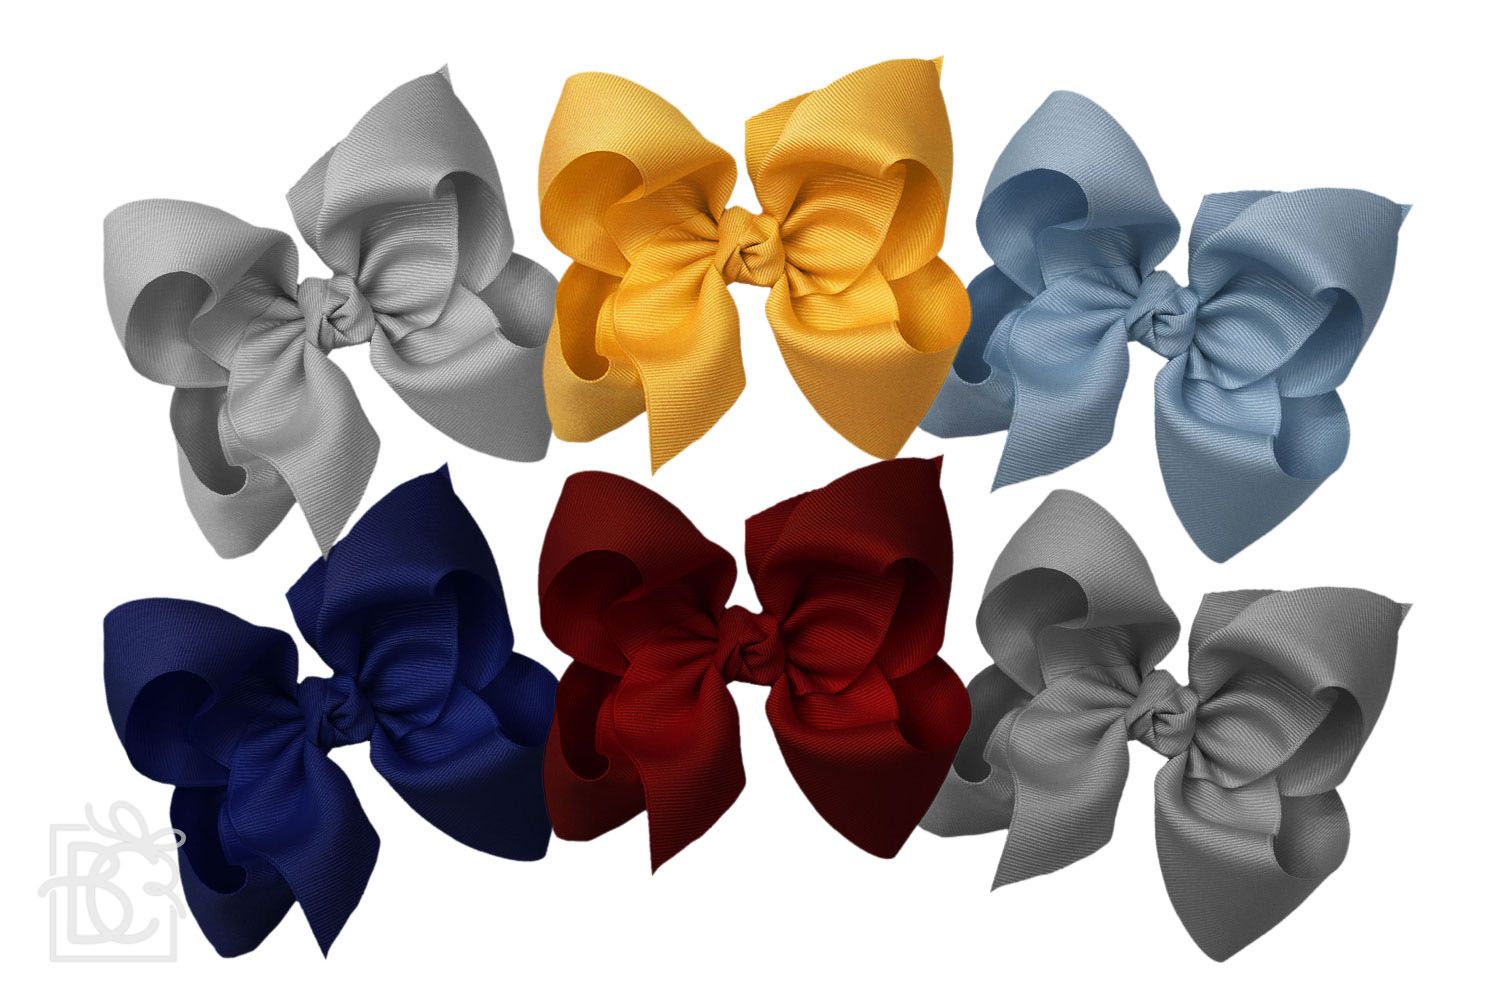 Beyond Creations - Hair Bows and Accessories - Huge 